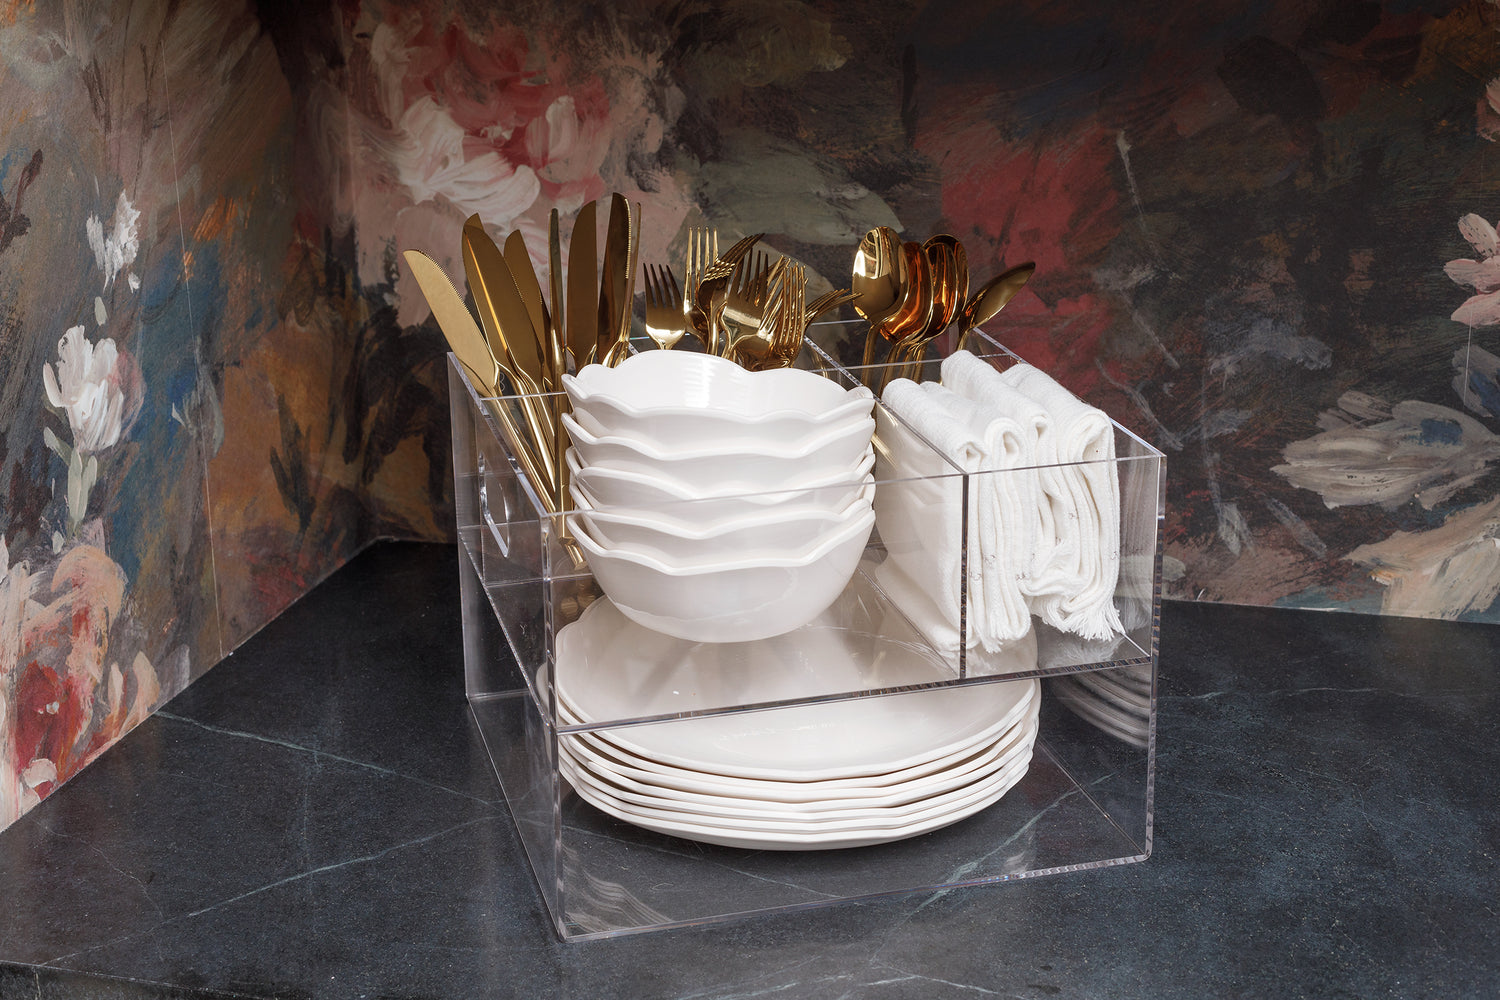 Acrylic Utensil Caddy sitting on the counter fully stocked with gold cutlery, white dishes, and linen napkins.